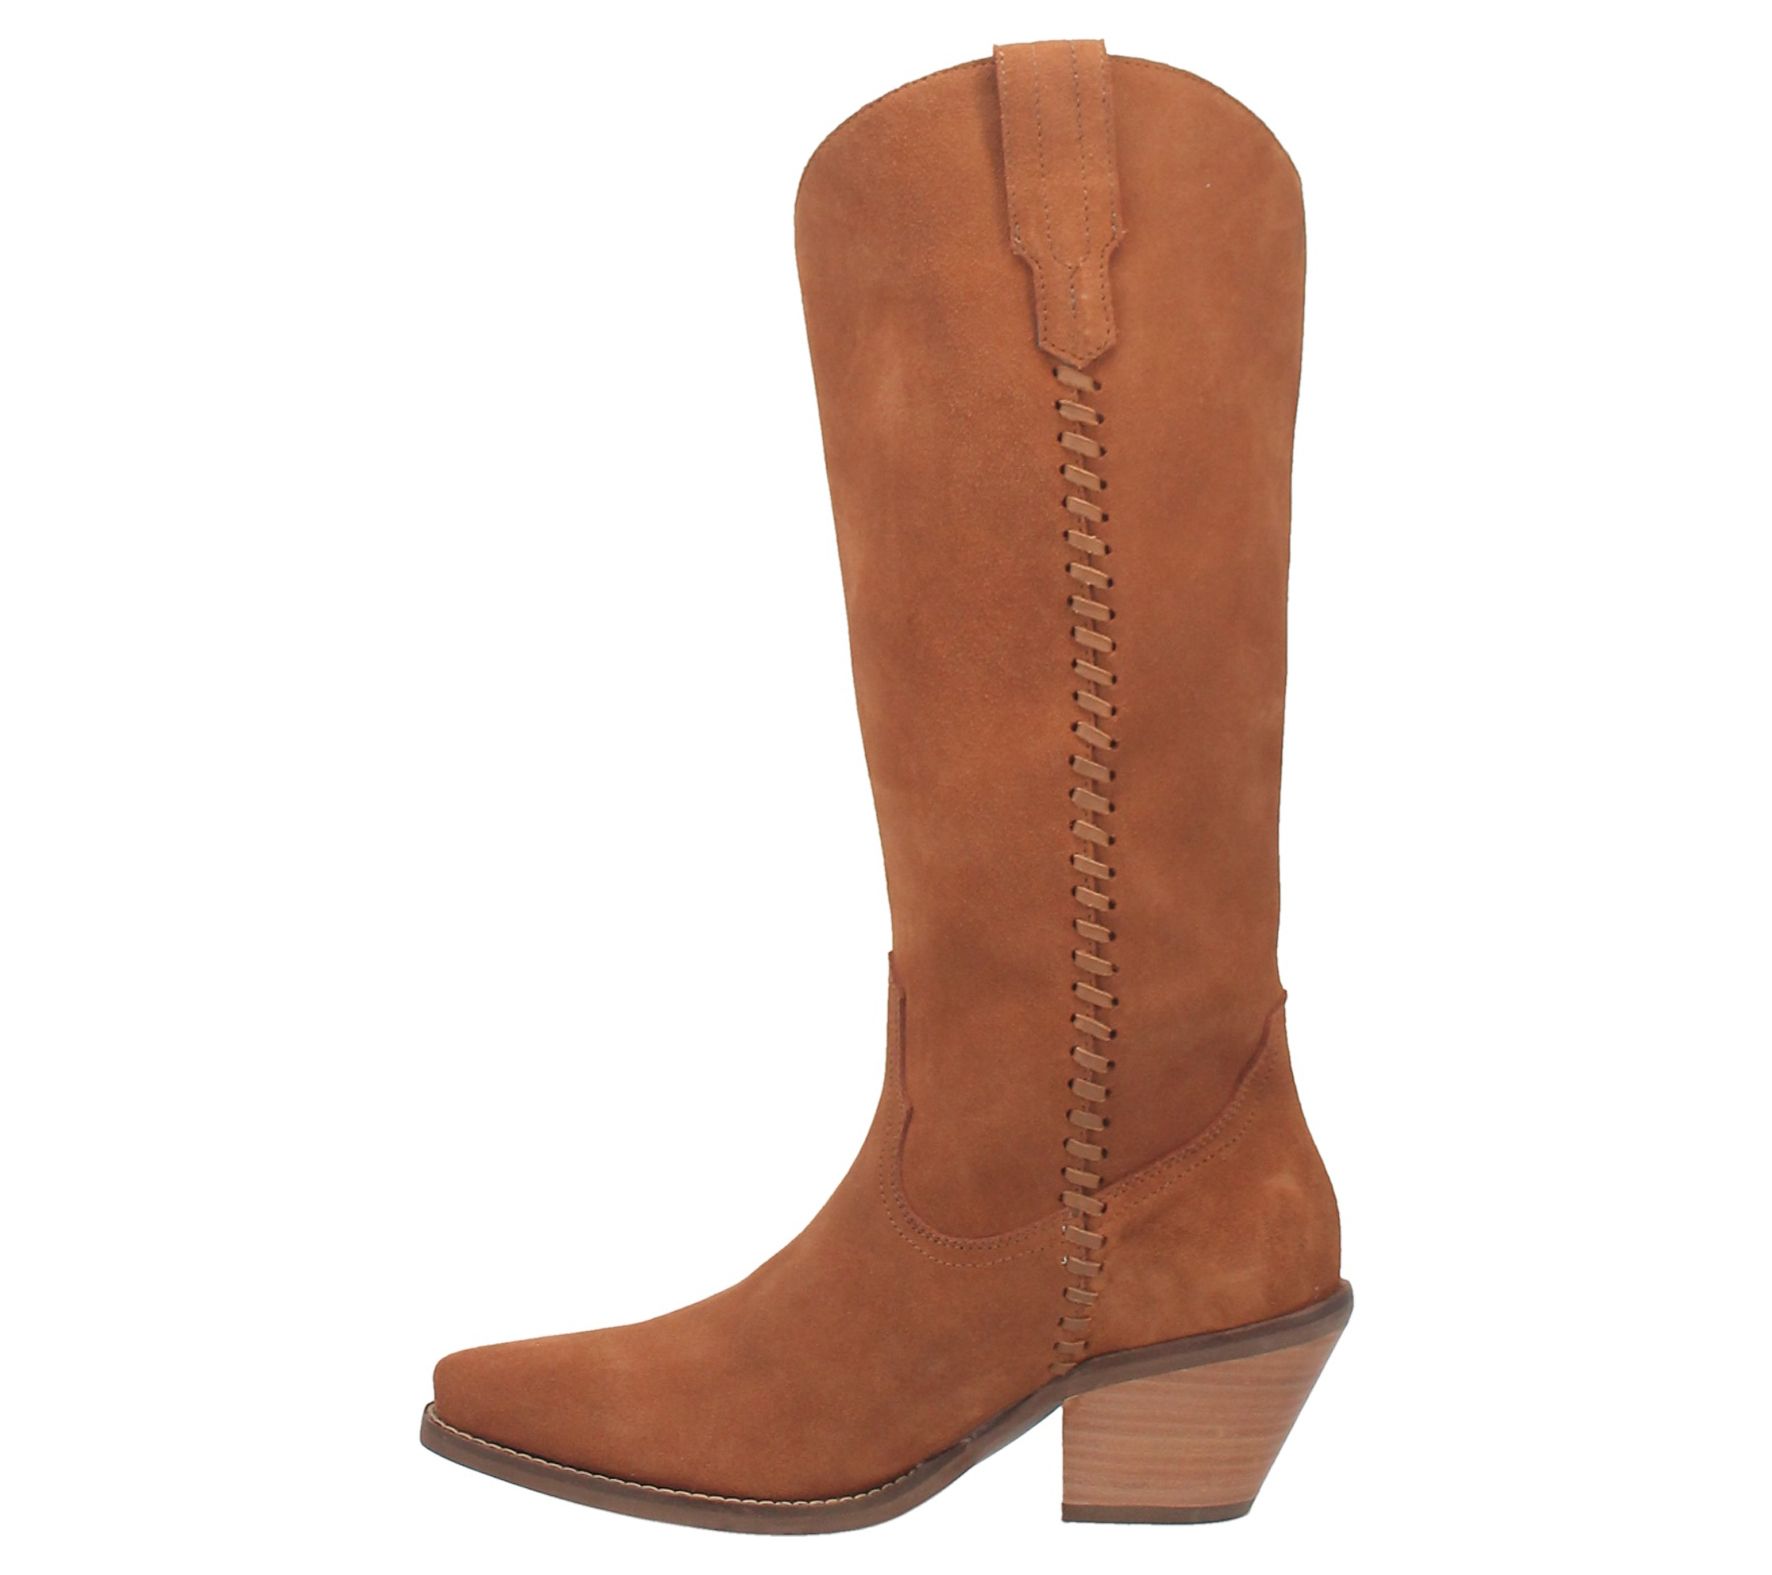 Dingo Women's Sweetwater Leather Boot - QVC.com